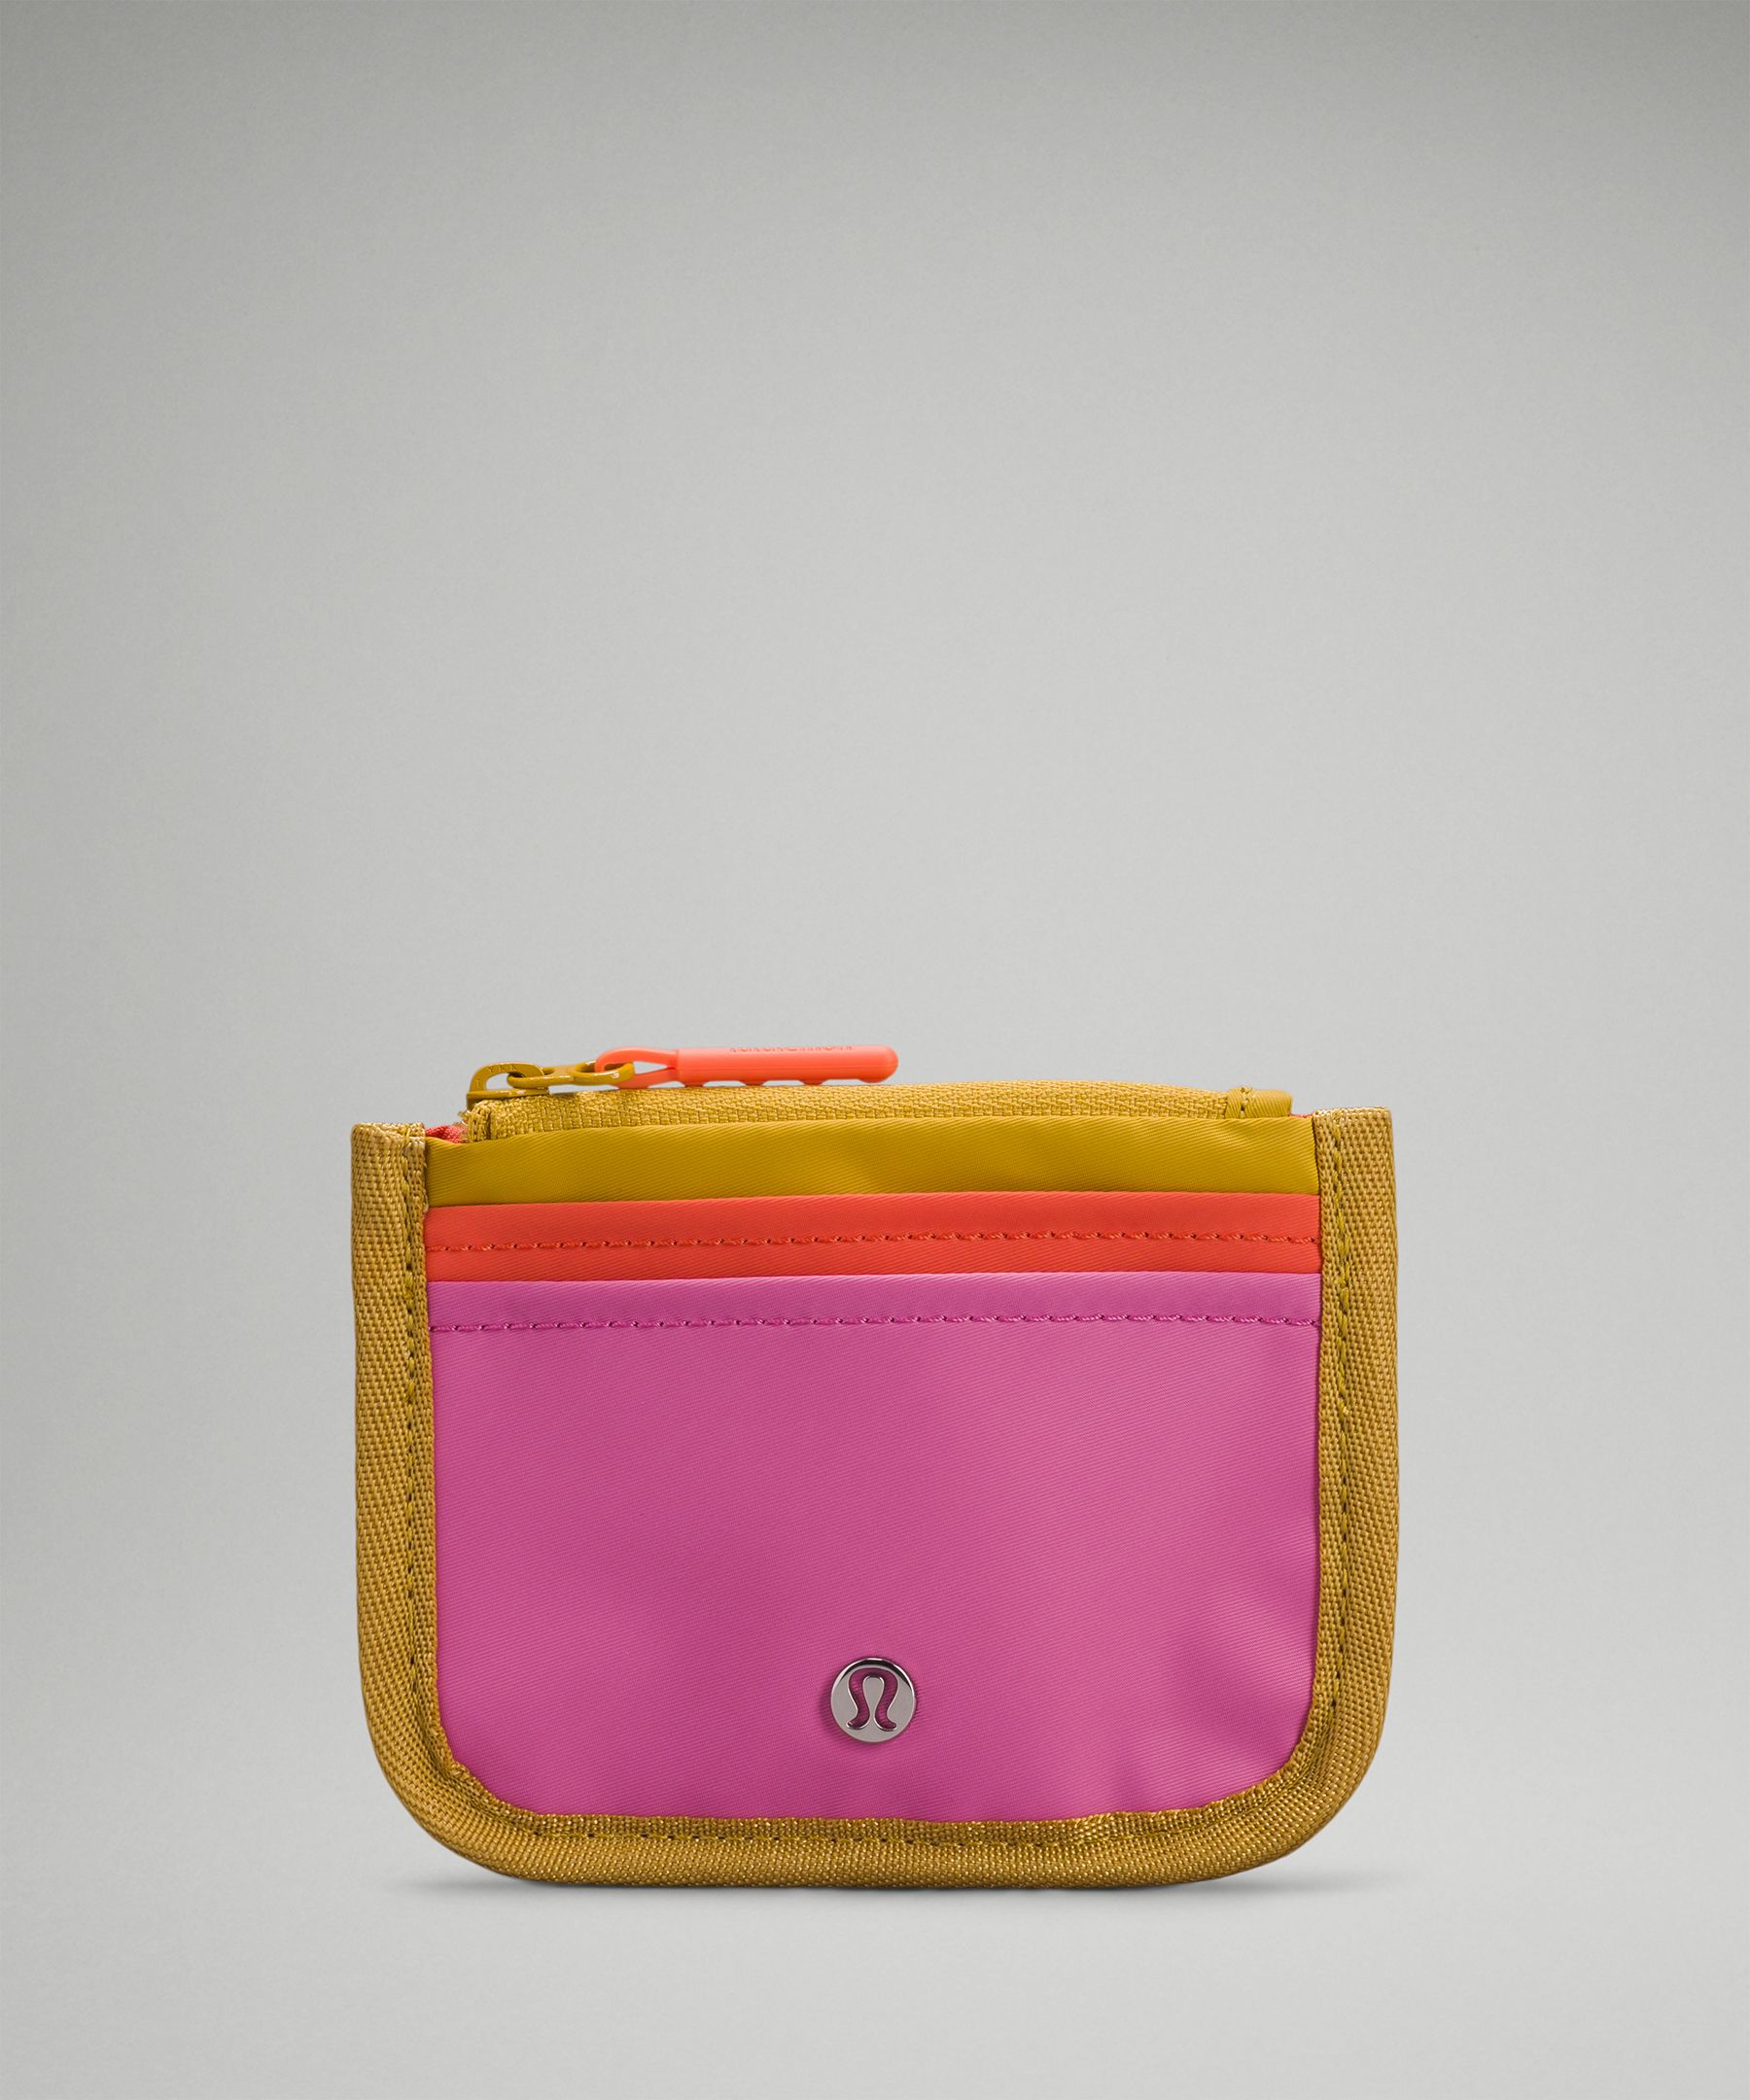 Lululemon True Identity Card Case In Pink Blossom/warm Coral/parachute